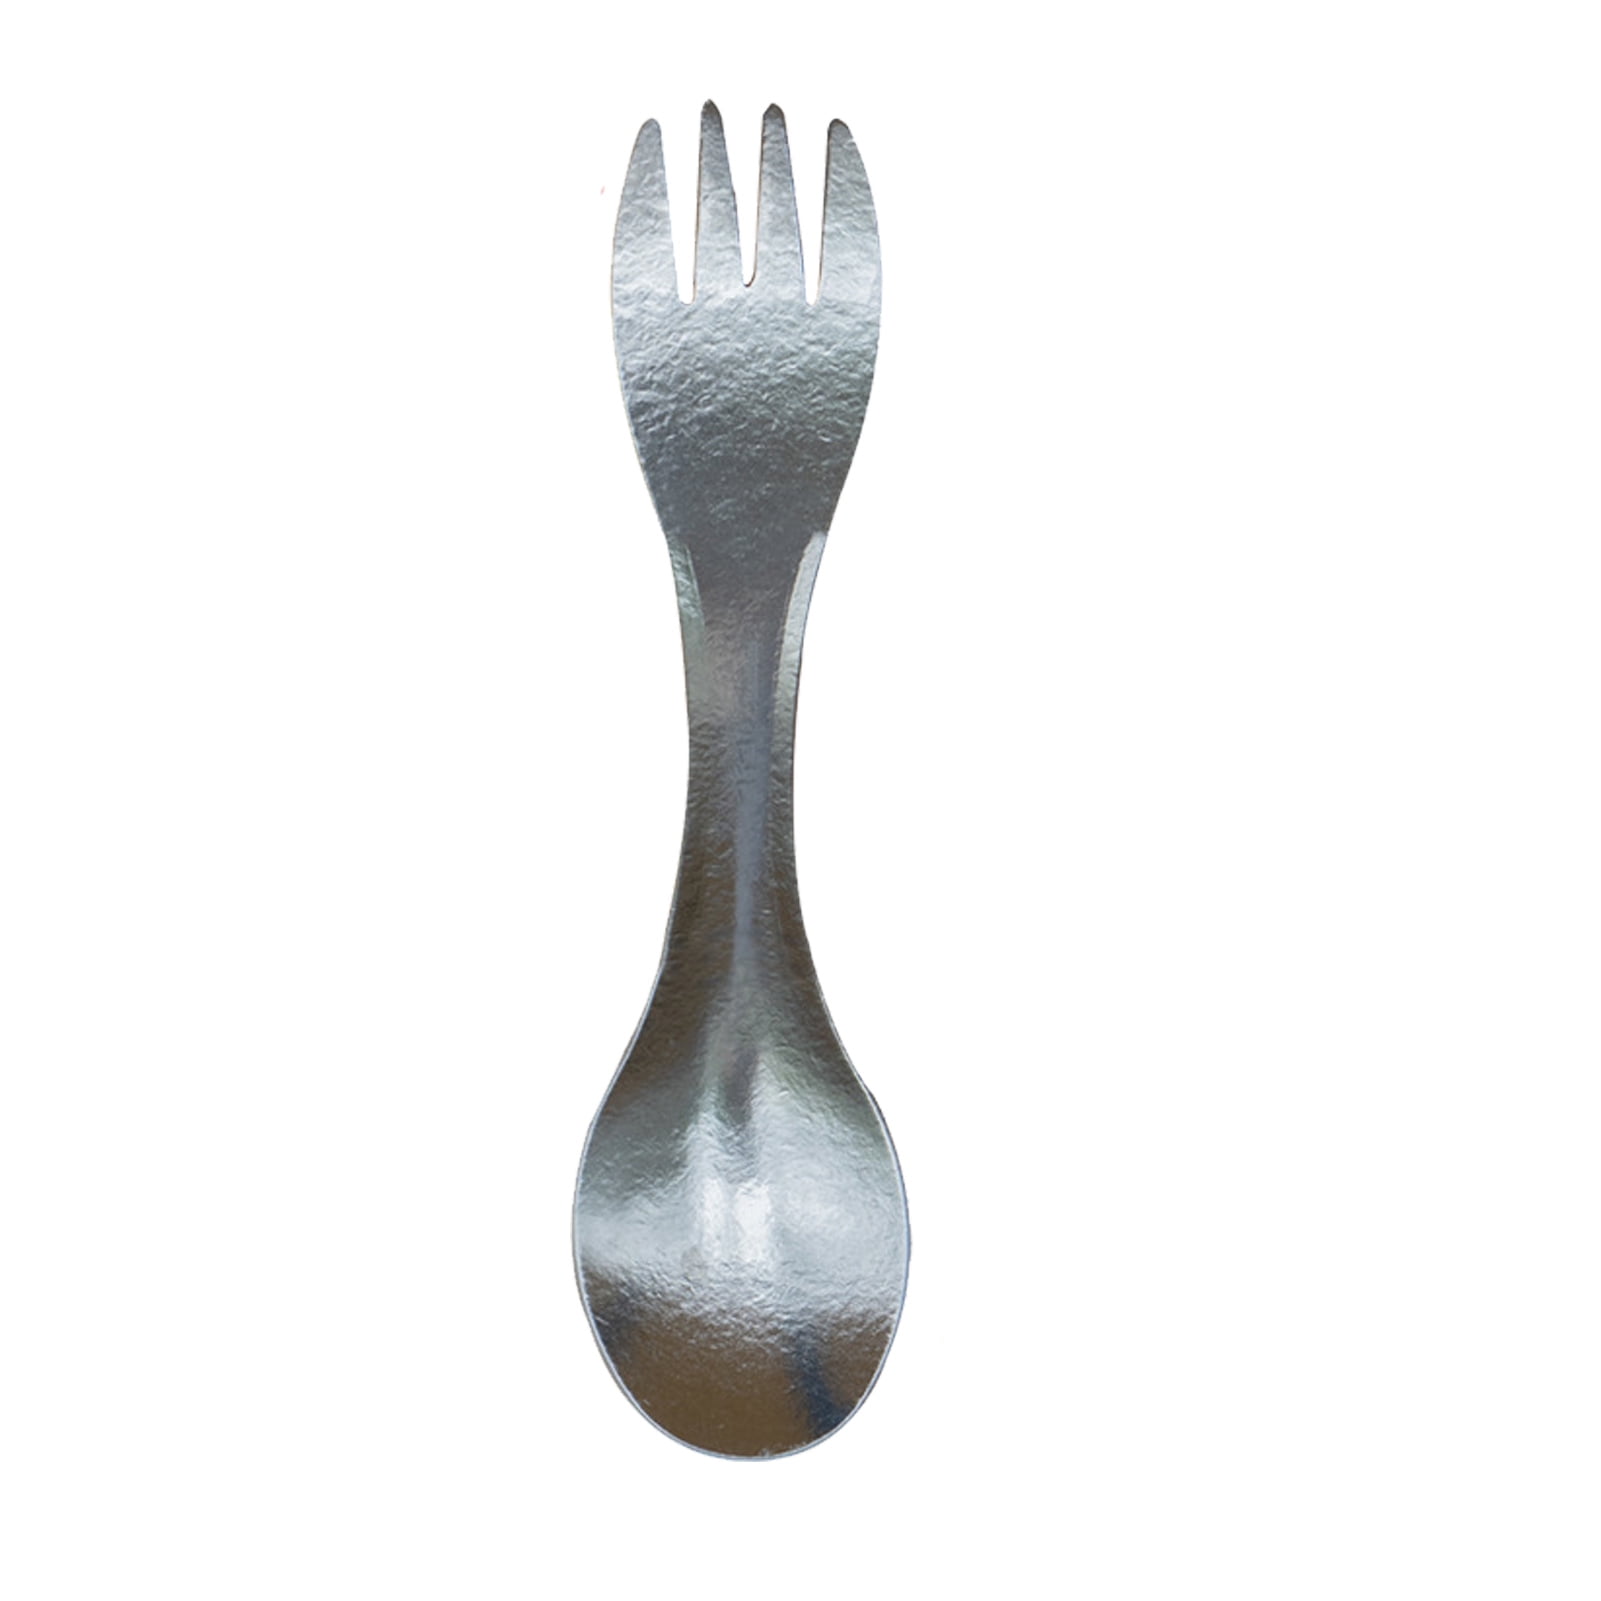 Outdoor Titanium Camping Spork Fork Spoon Backpacking Picinc Cookware Hiking·